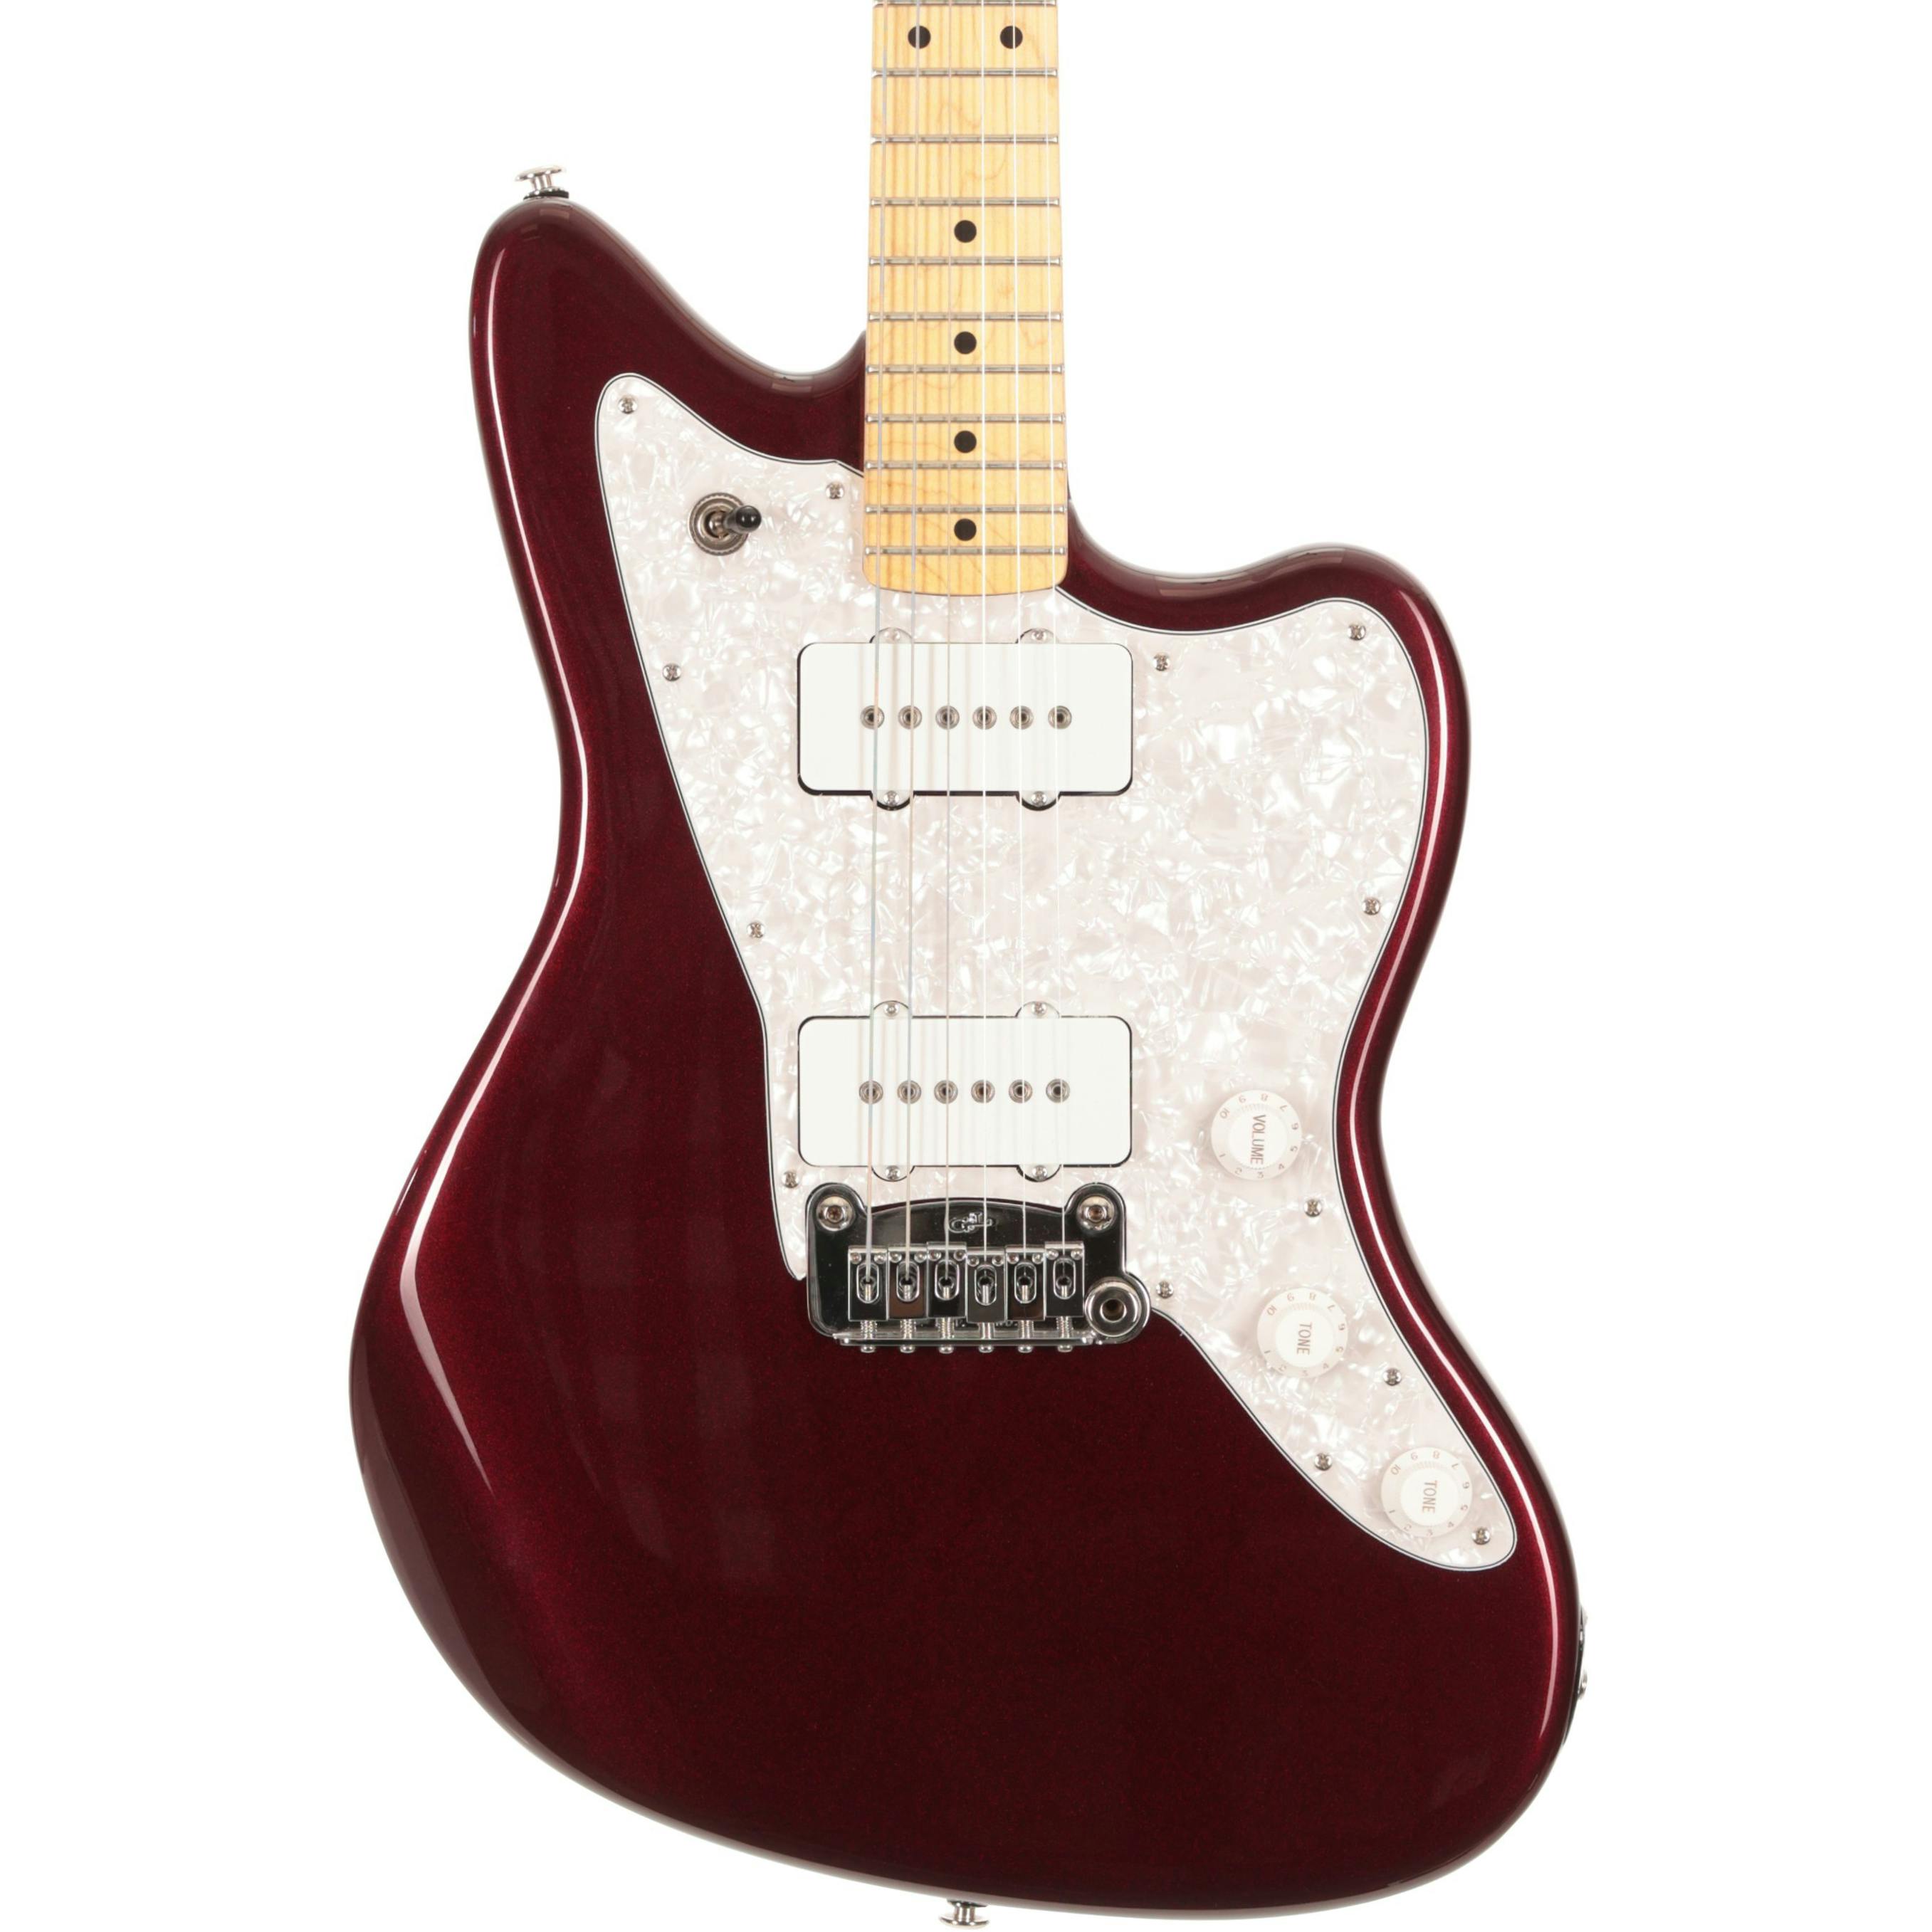 G&L USA Fullerton Deluxe Doheny Electric Guitar in Red Ruby 